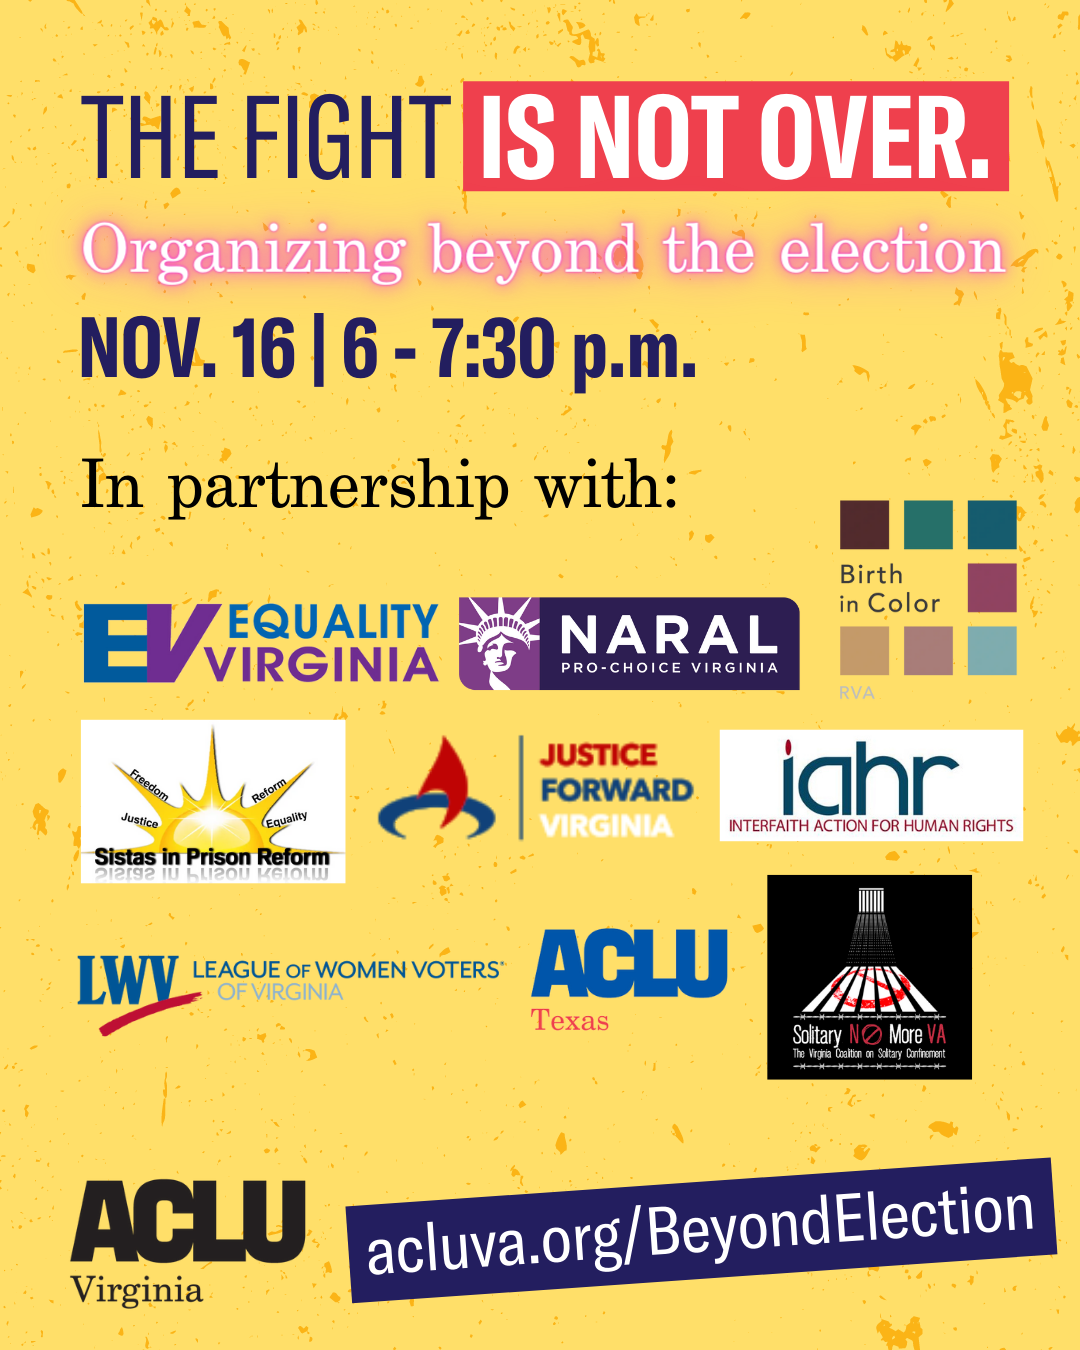 flyer for our post-election rally with the text "The fight is not over: Organizing beyond the election" and logos of all of our partners/panelists